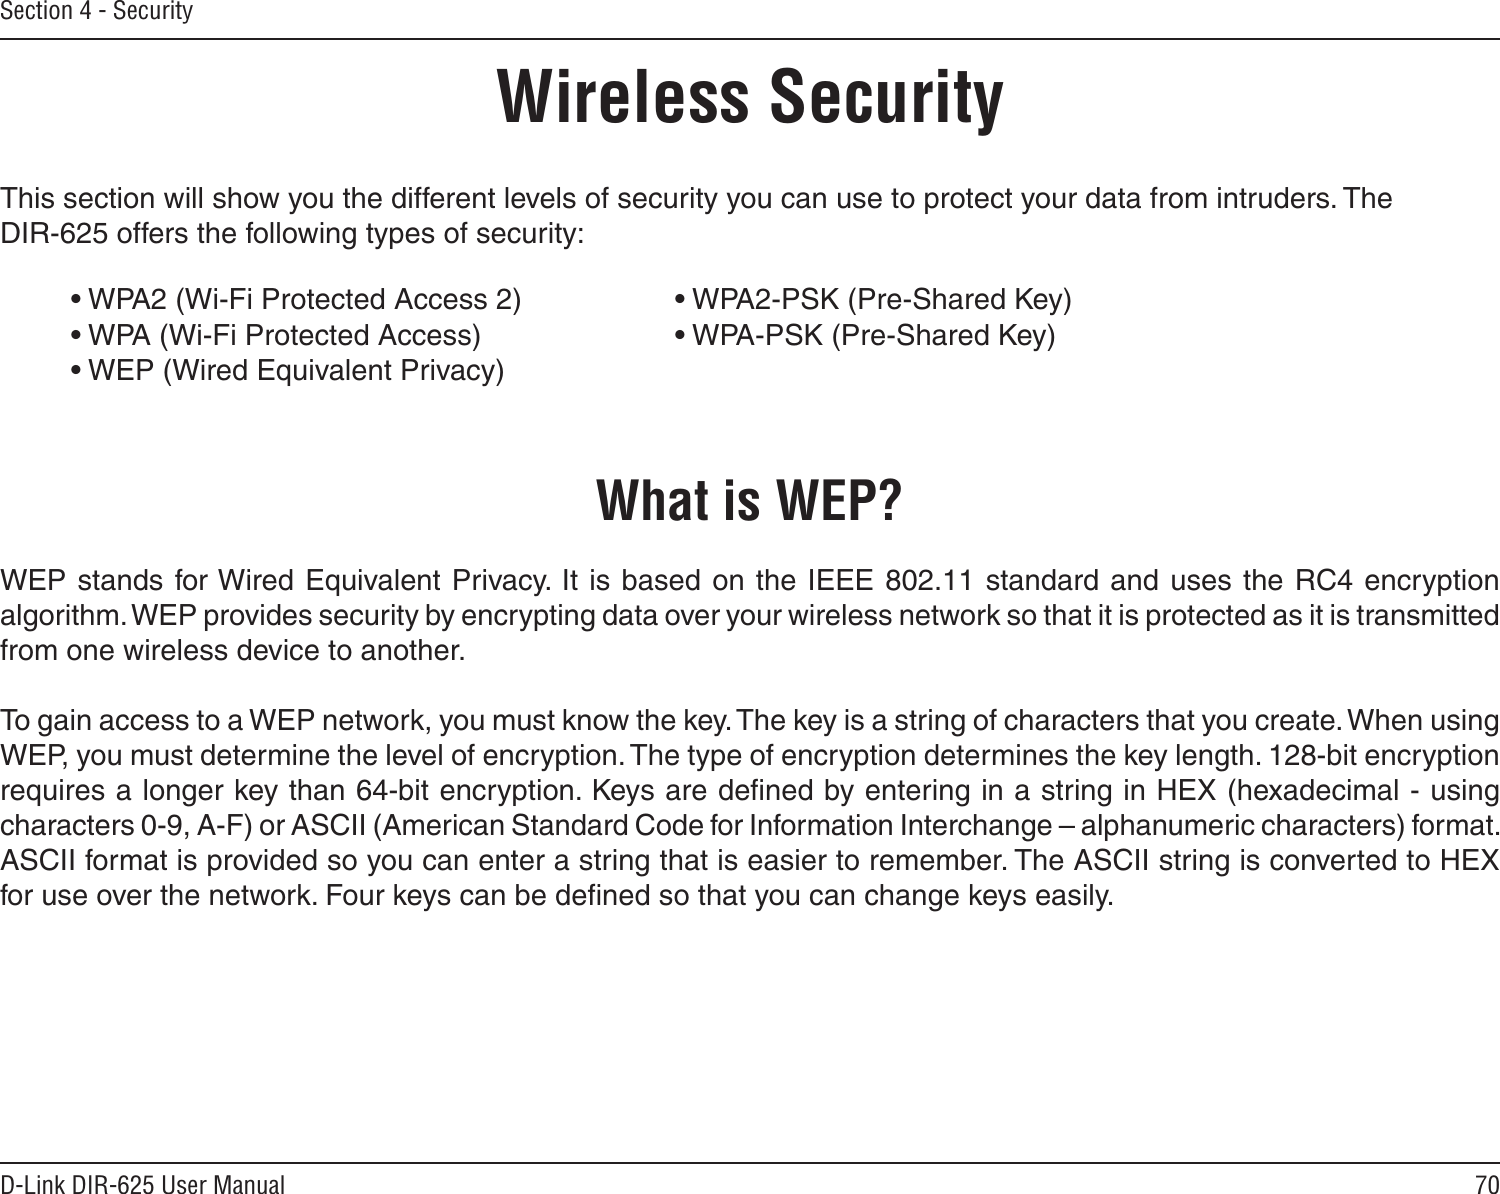 70D-Link DIR-625 User ManualSection 4 - SecurityWireless SecurityThis section will show you the different levels of security you can use to protect your data from intruders. The DIR-625 offers the following types of security:• WPA2 (Wi-Fi Protected Access 2)     • WPA2-PSK (Pre-Shared Key)• WPA (Wi-Fi Protected Access)      • WPA-PSK (Pre-Shared Key)• WEP (Wired Equivalent Privacy)What is WEP?WEP stands for Wired Equivalent Privacy. It  is based  on the IEEE 802.11 standard and uses  the RC4 encryption algorithm. WEP provides security by encrypting data over your wireless network so that it is protected as it is transmitted from one wireless device to another.To gain access to a WEP network, you must know the key. The key is a string of characters that you create. When using WEP, you must determine the level of encryption. The type of encryption determines the key length. 128-bit encryption requires a longer key than 64-bit encryption. Keys are deﬁned by entering in a string in HEX (hexadecimal - using characters 0-9, A-F) or ASCII (American Standard Code for Information Interchange – alphanumeric characters) format. ASCII format is provided so you can enter a string that is easier to remember. The ASCII string is converted to HEX for use over the network. Four keys can be deﬁned so that you can change keys easily.